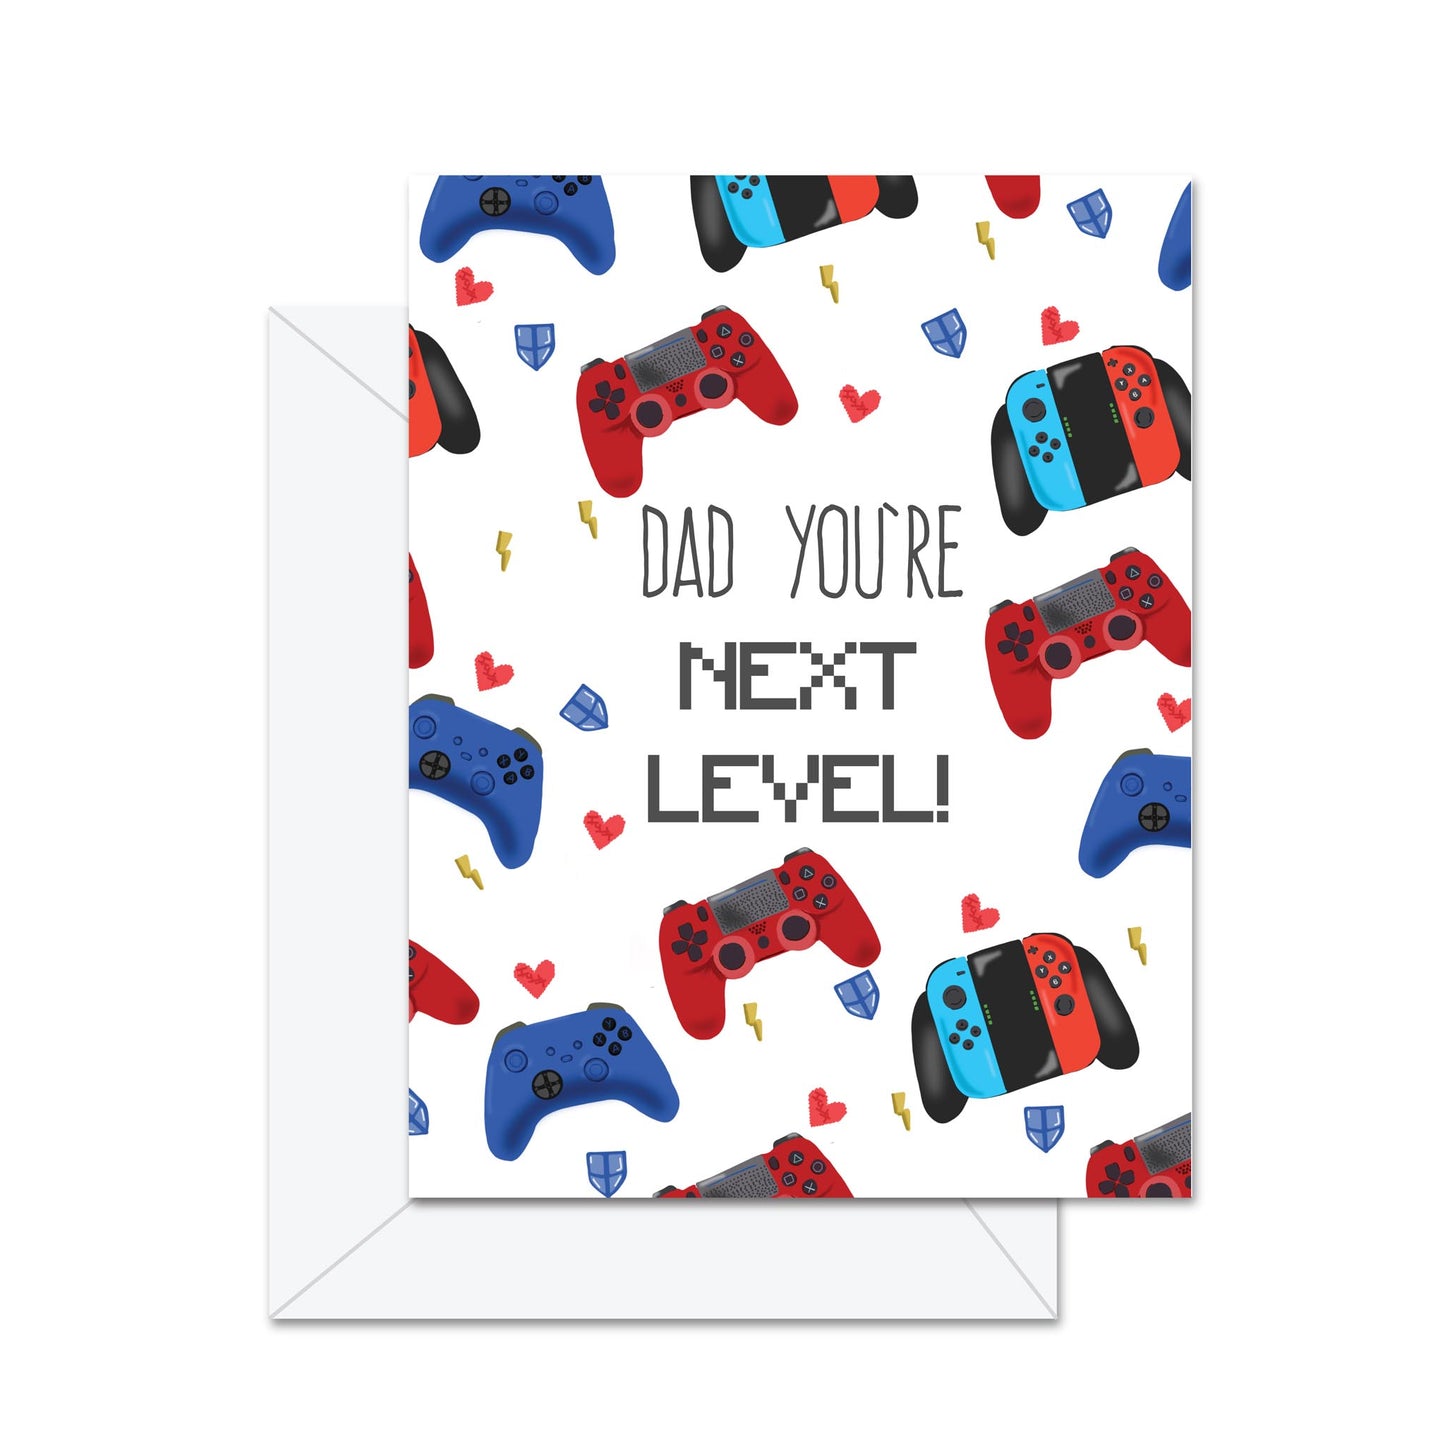 Dad You're Next Level! - Greeting Card